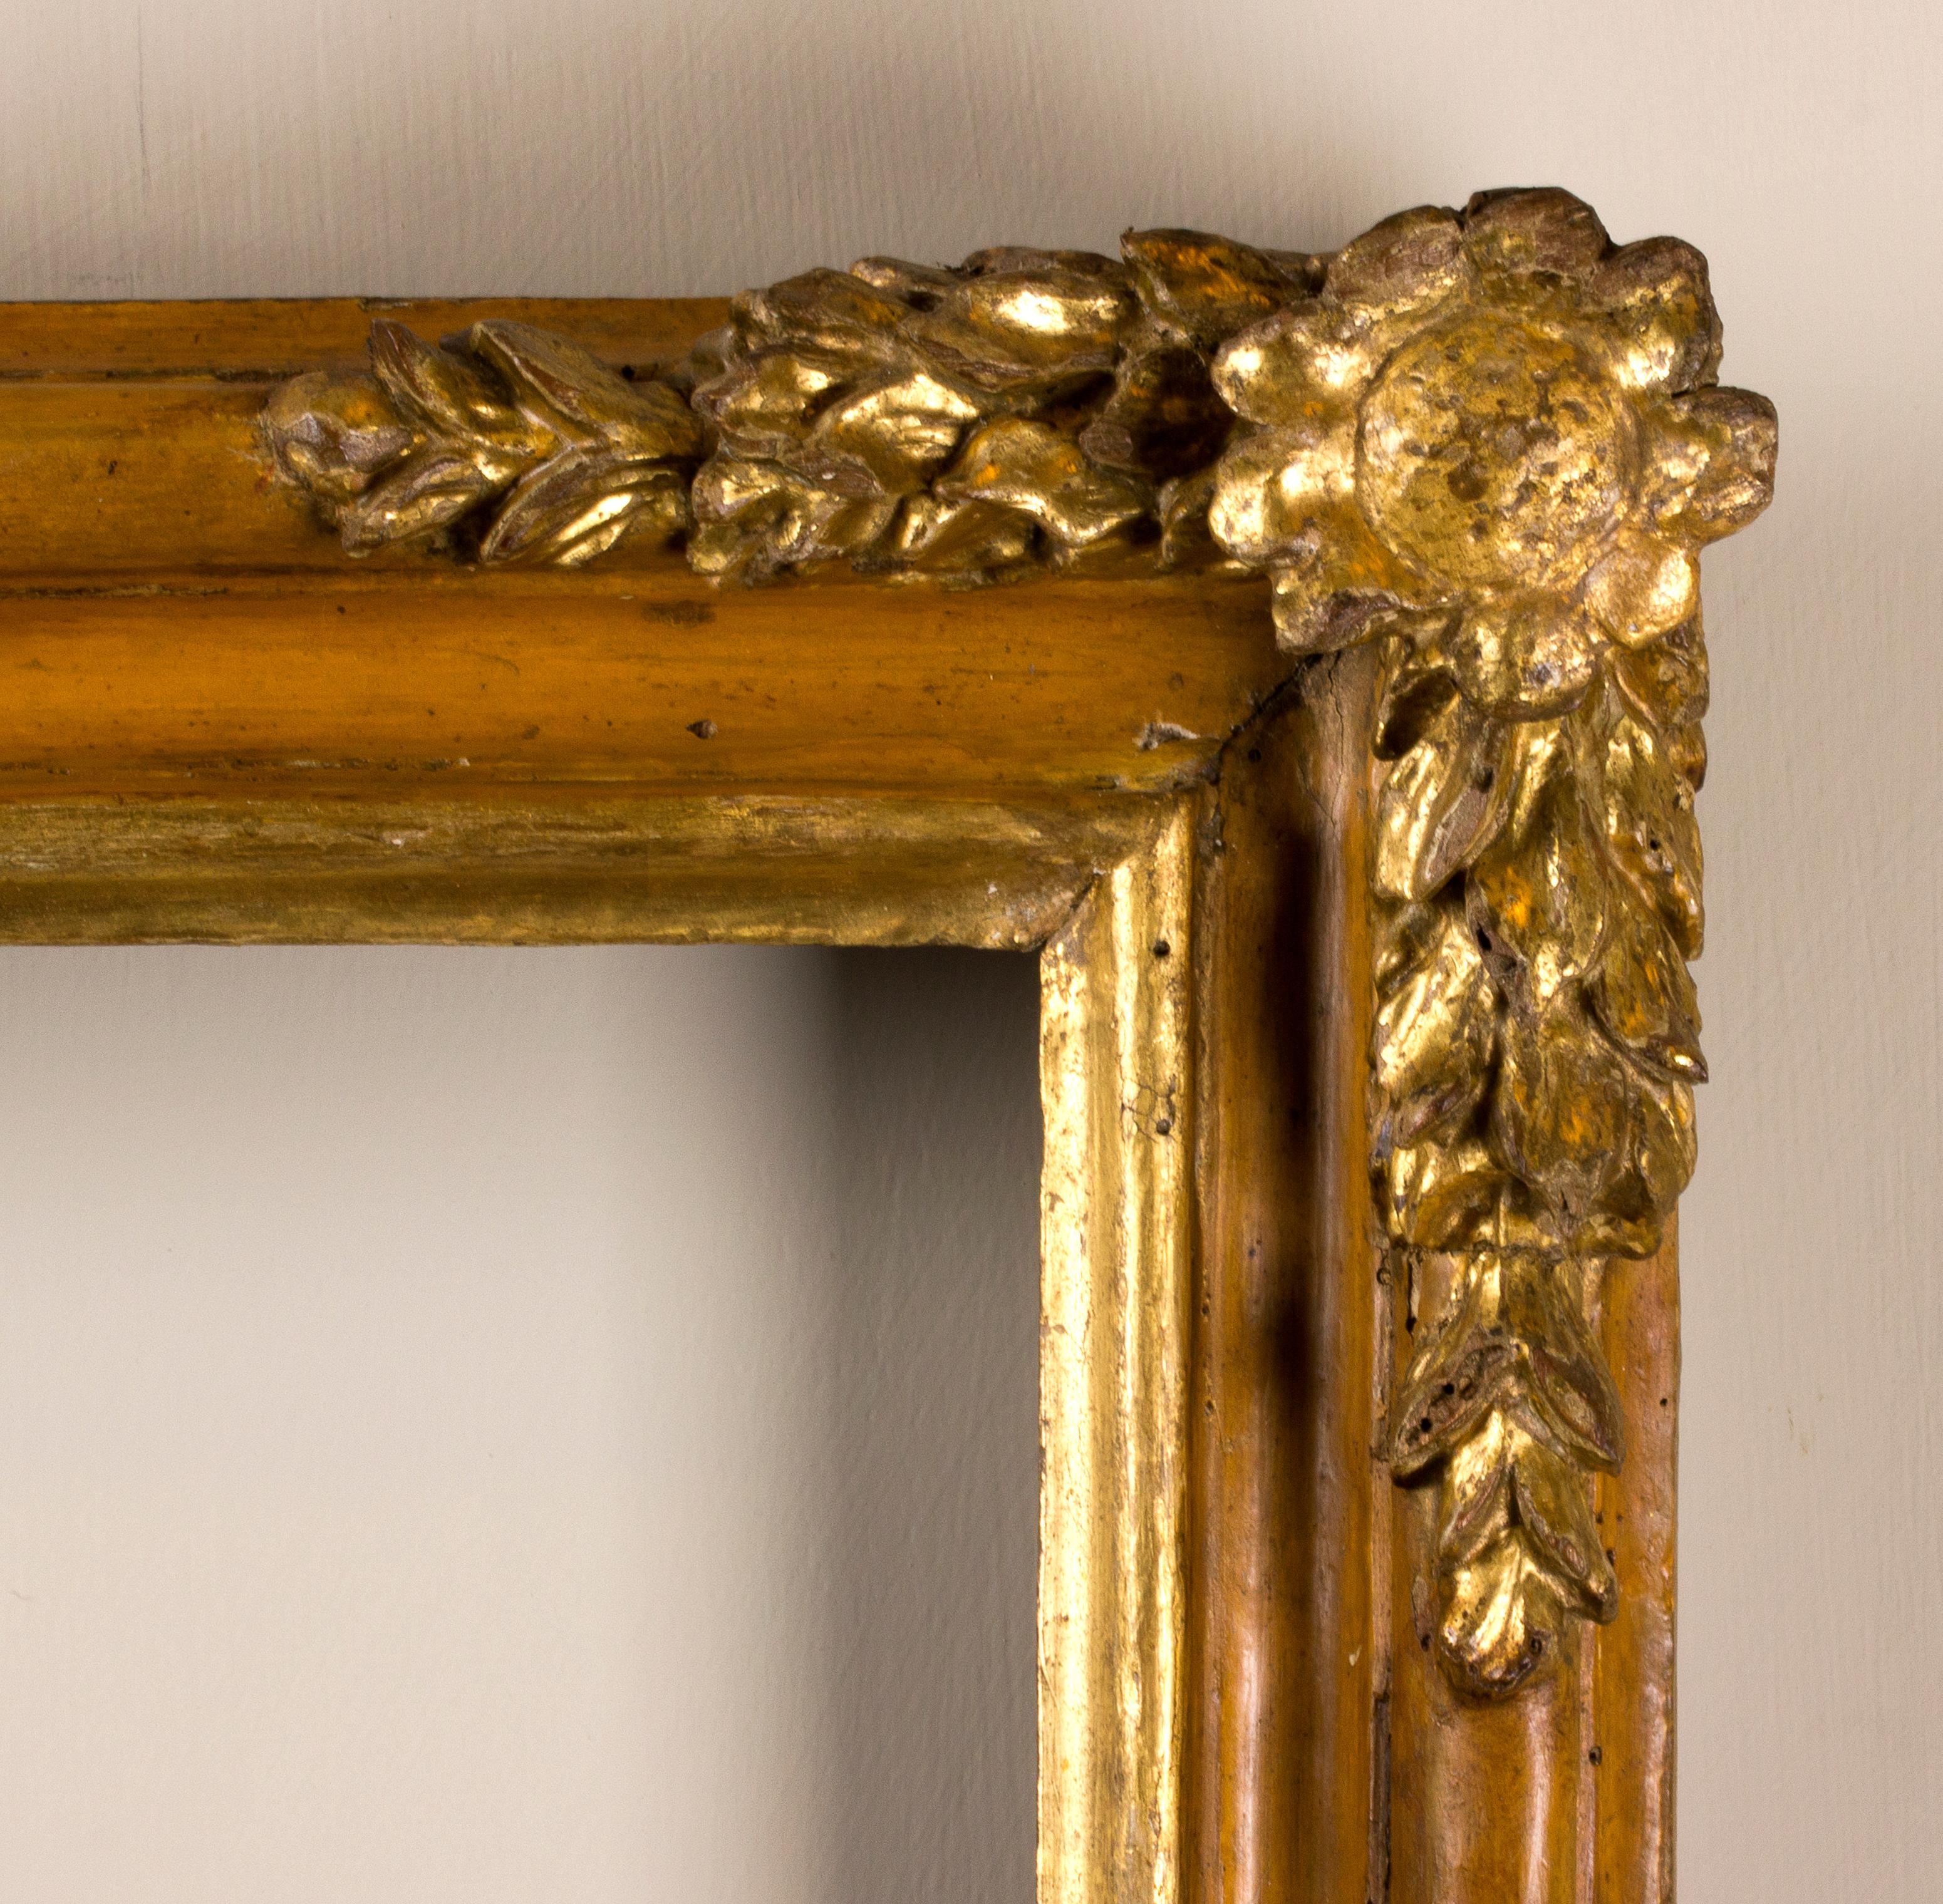 Piedmont frame, early 18th century
Golden and lacquered Salvator Rosa frame embellished by carved wood vegetal elements.
Internal measures: 66.3 x 48.5 cm; external measures: 78.5 x 61.3 cm
Inside: 66.3 x 48,5 cm; outside: 78.5 x 61.3 cm
Depth